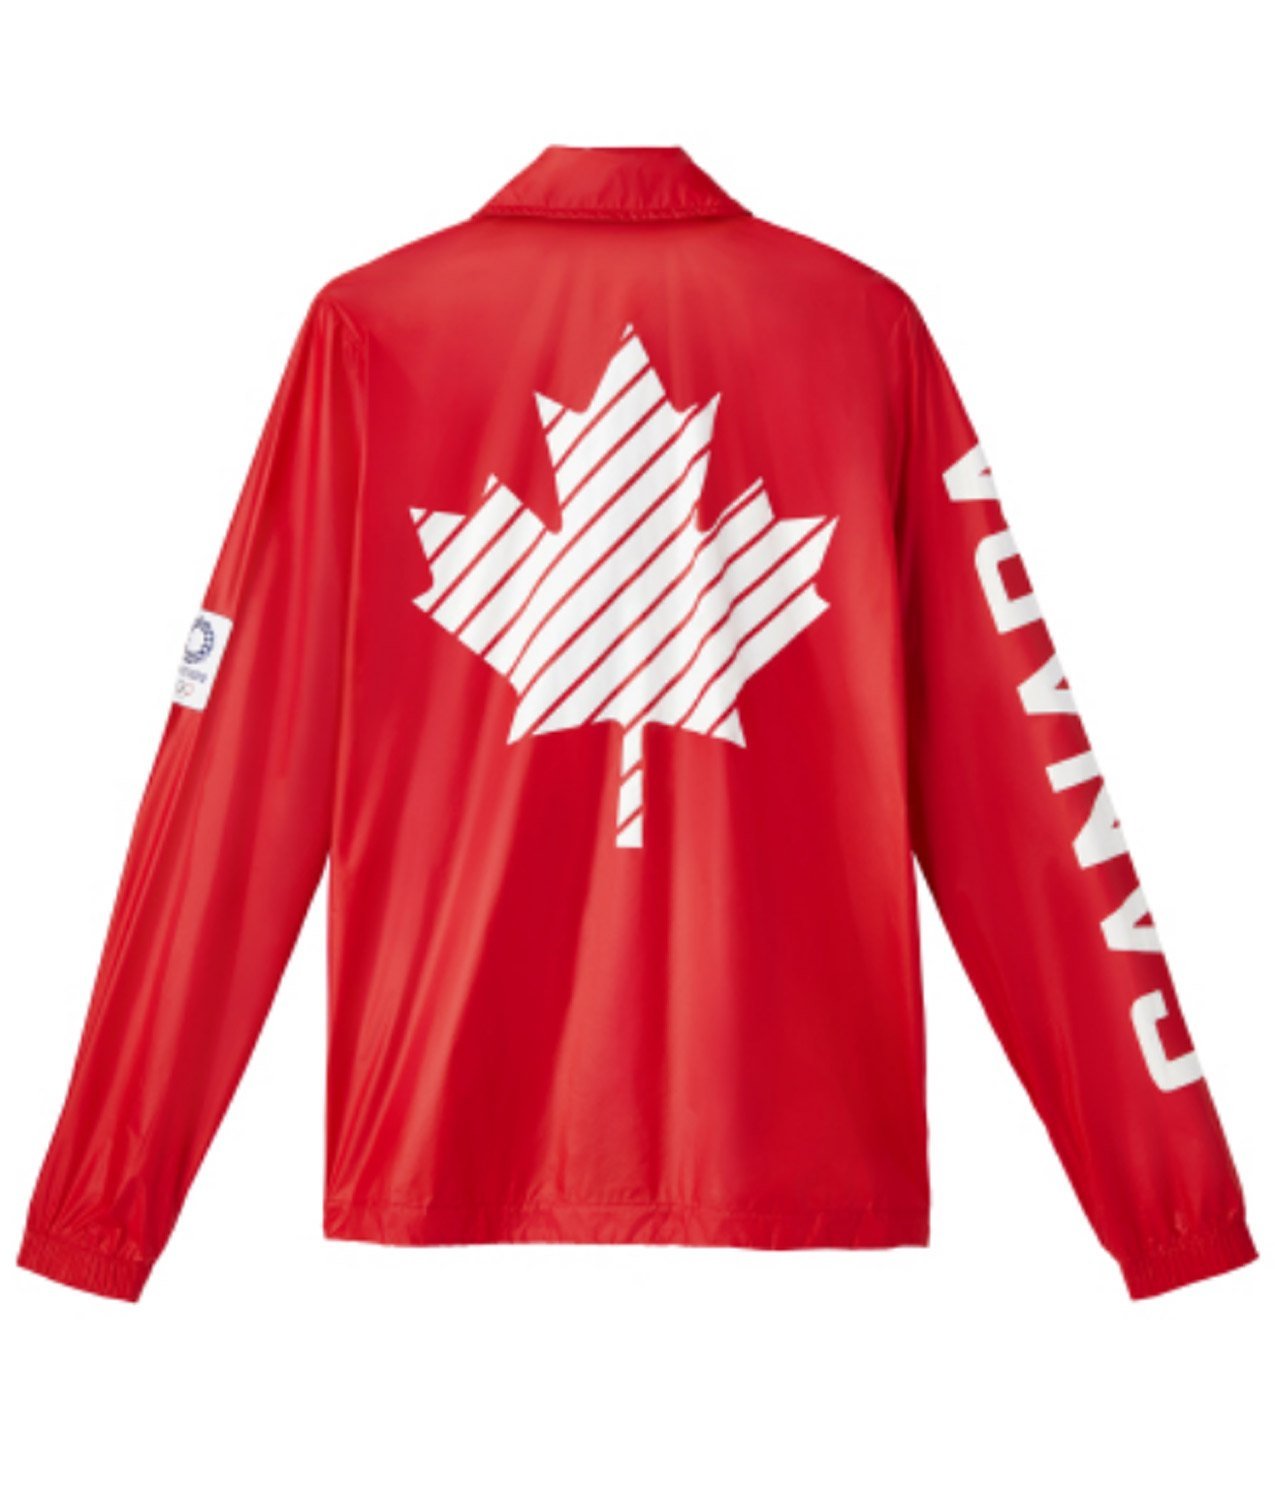 canada-red-printed-jacket